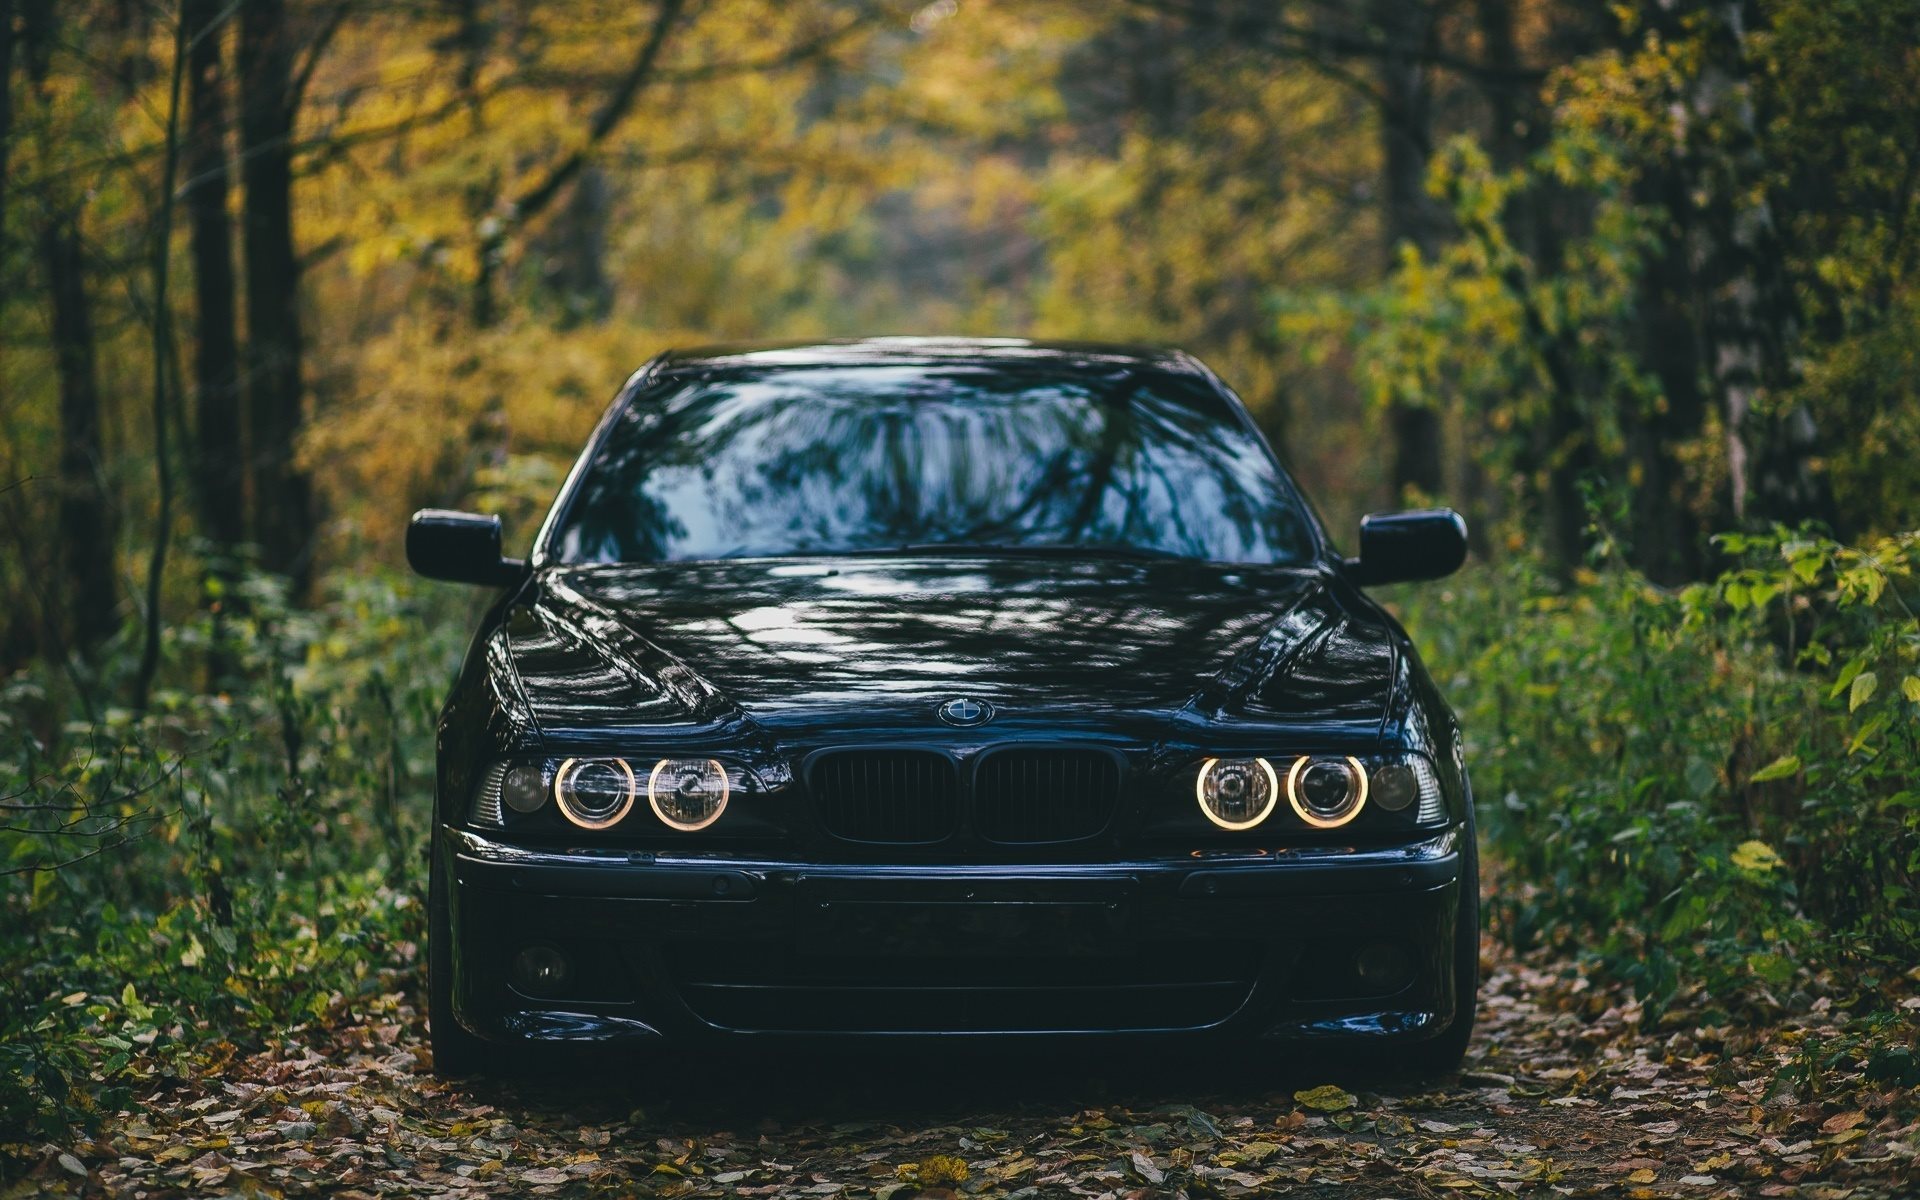 Bmw E39 Wallpapers